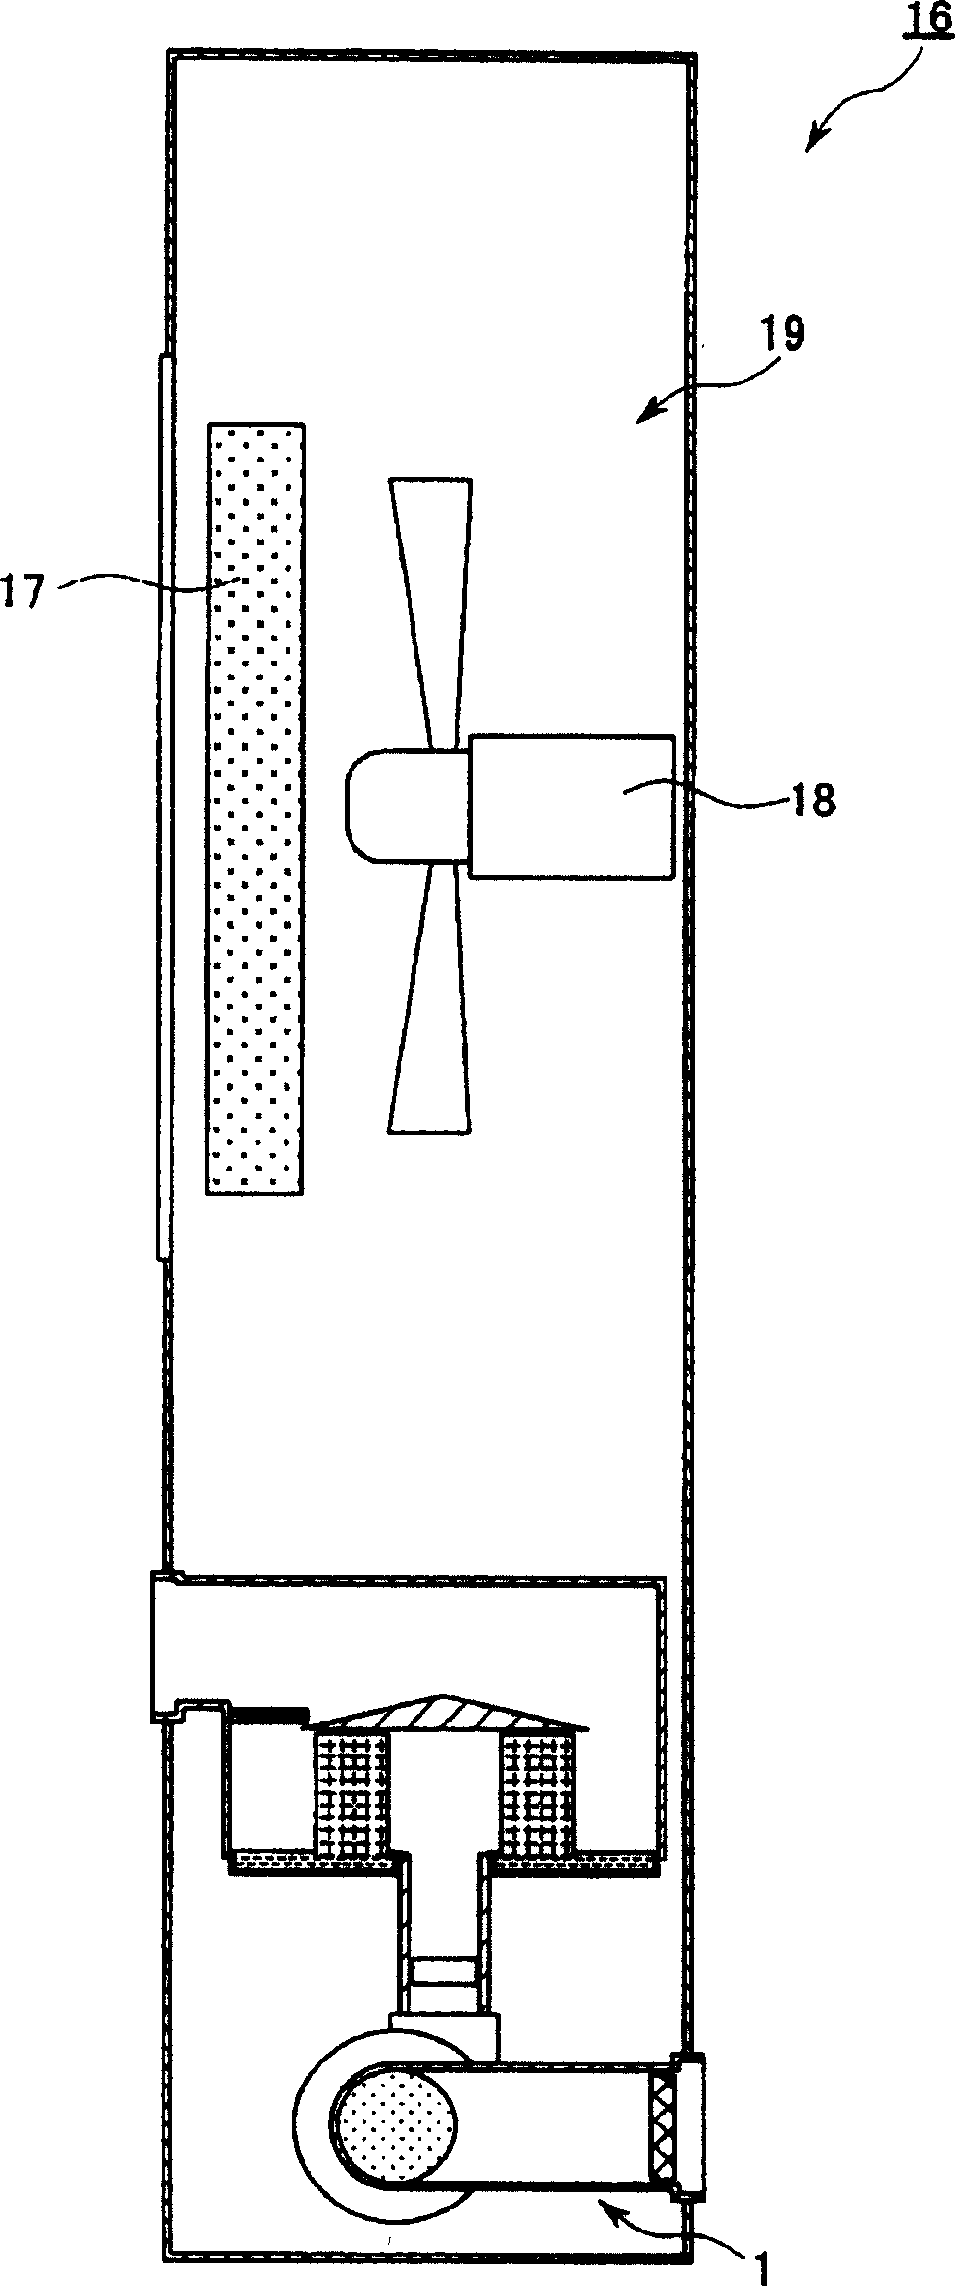 Humidifying device and air conditioner